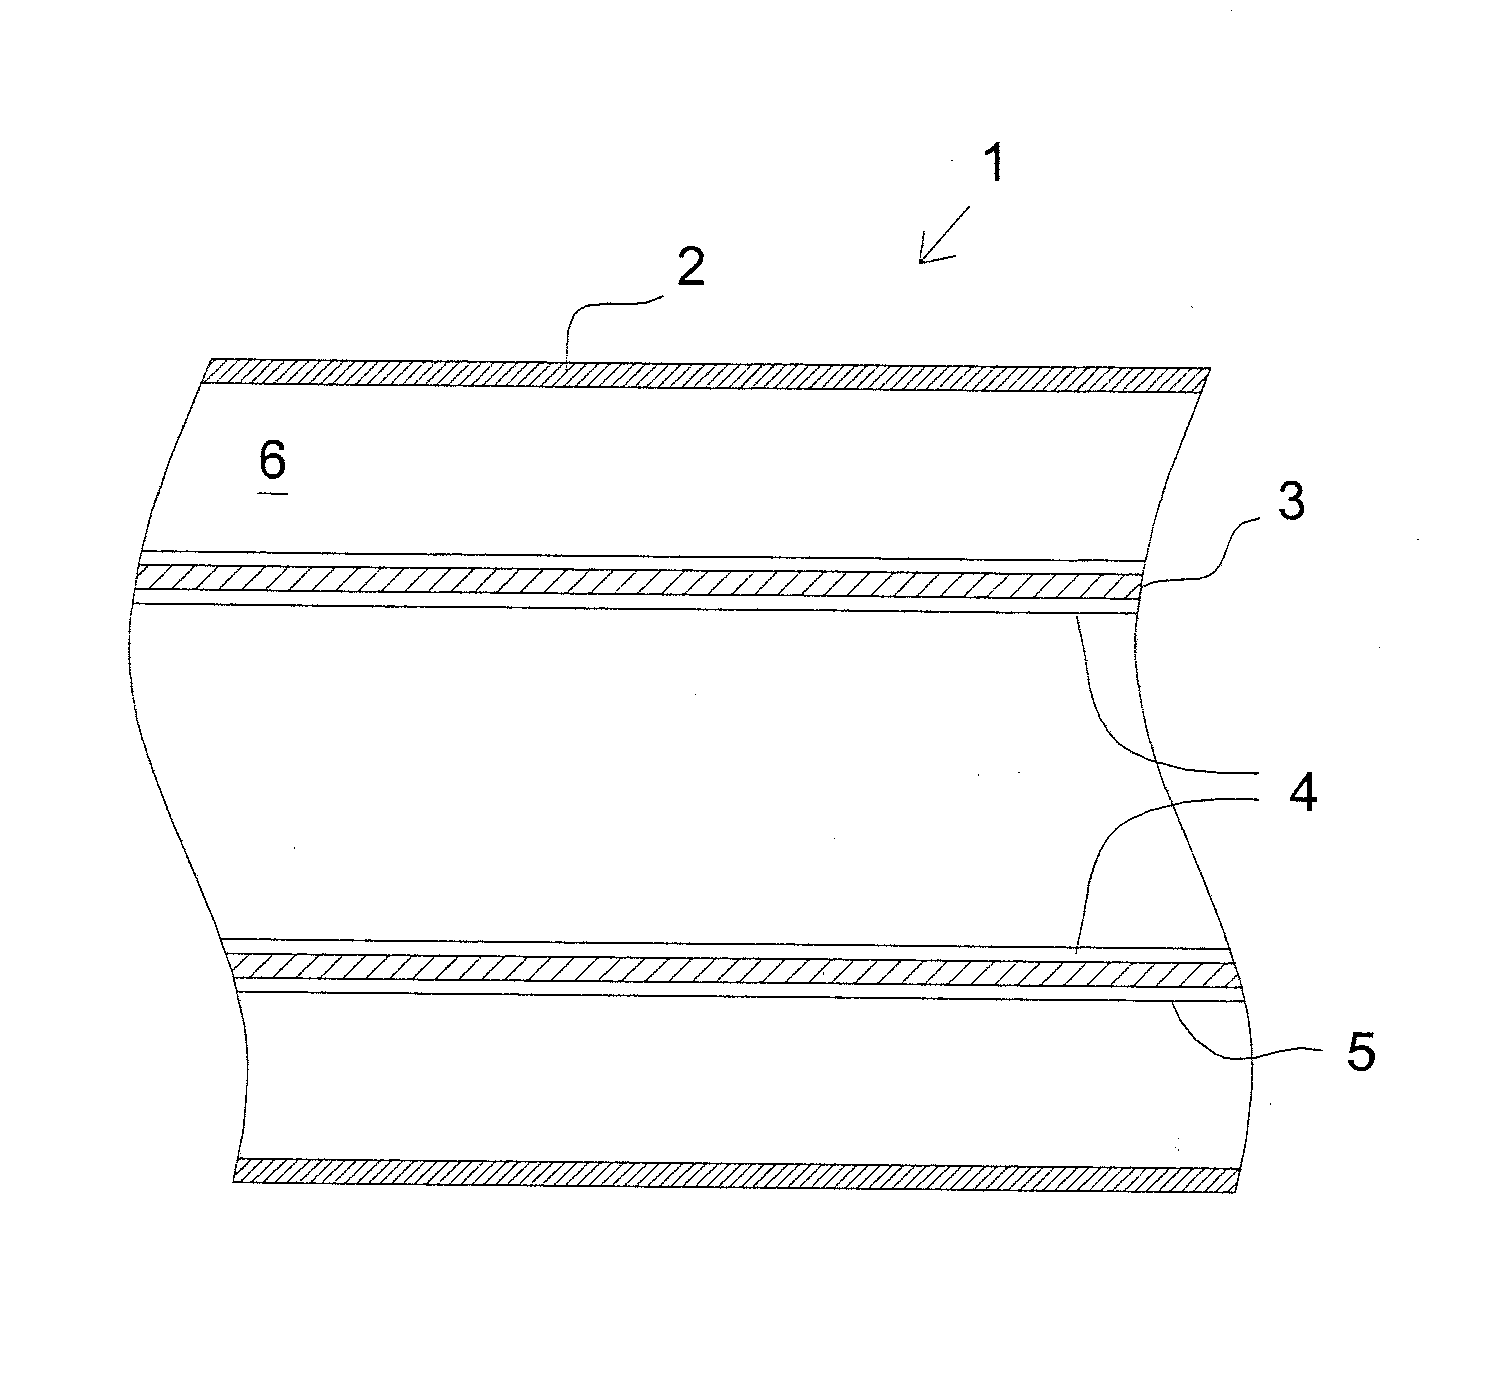 Tubular radiation absorbing device for a solar power plant with reduced heat losses